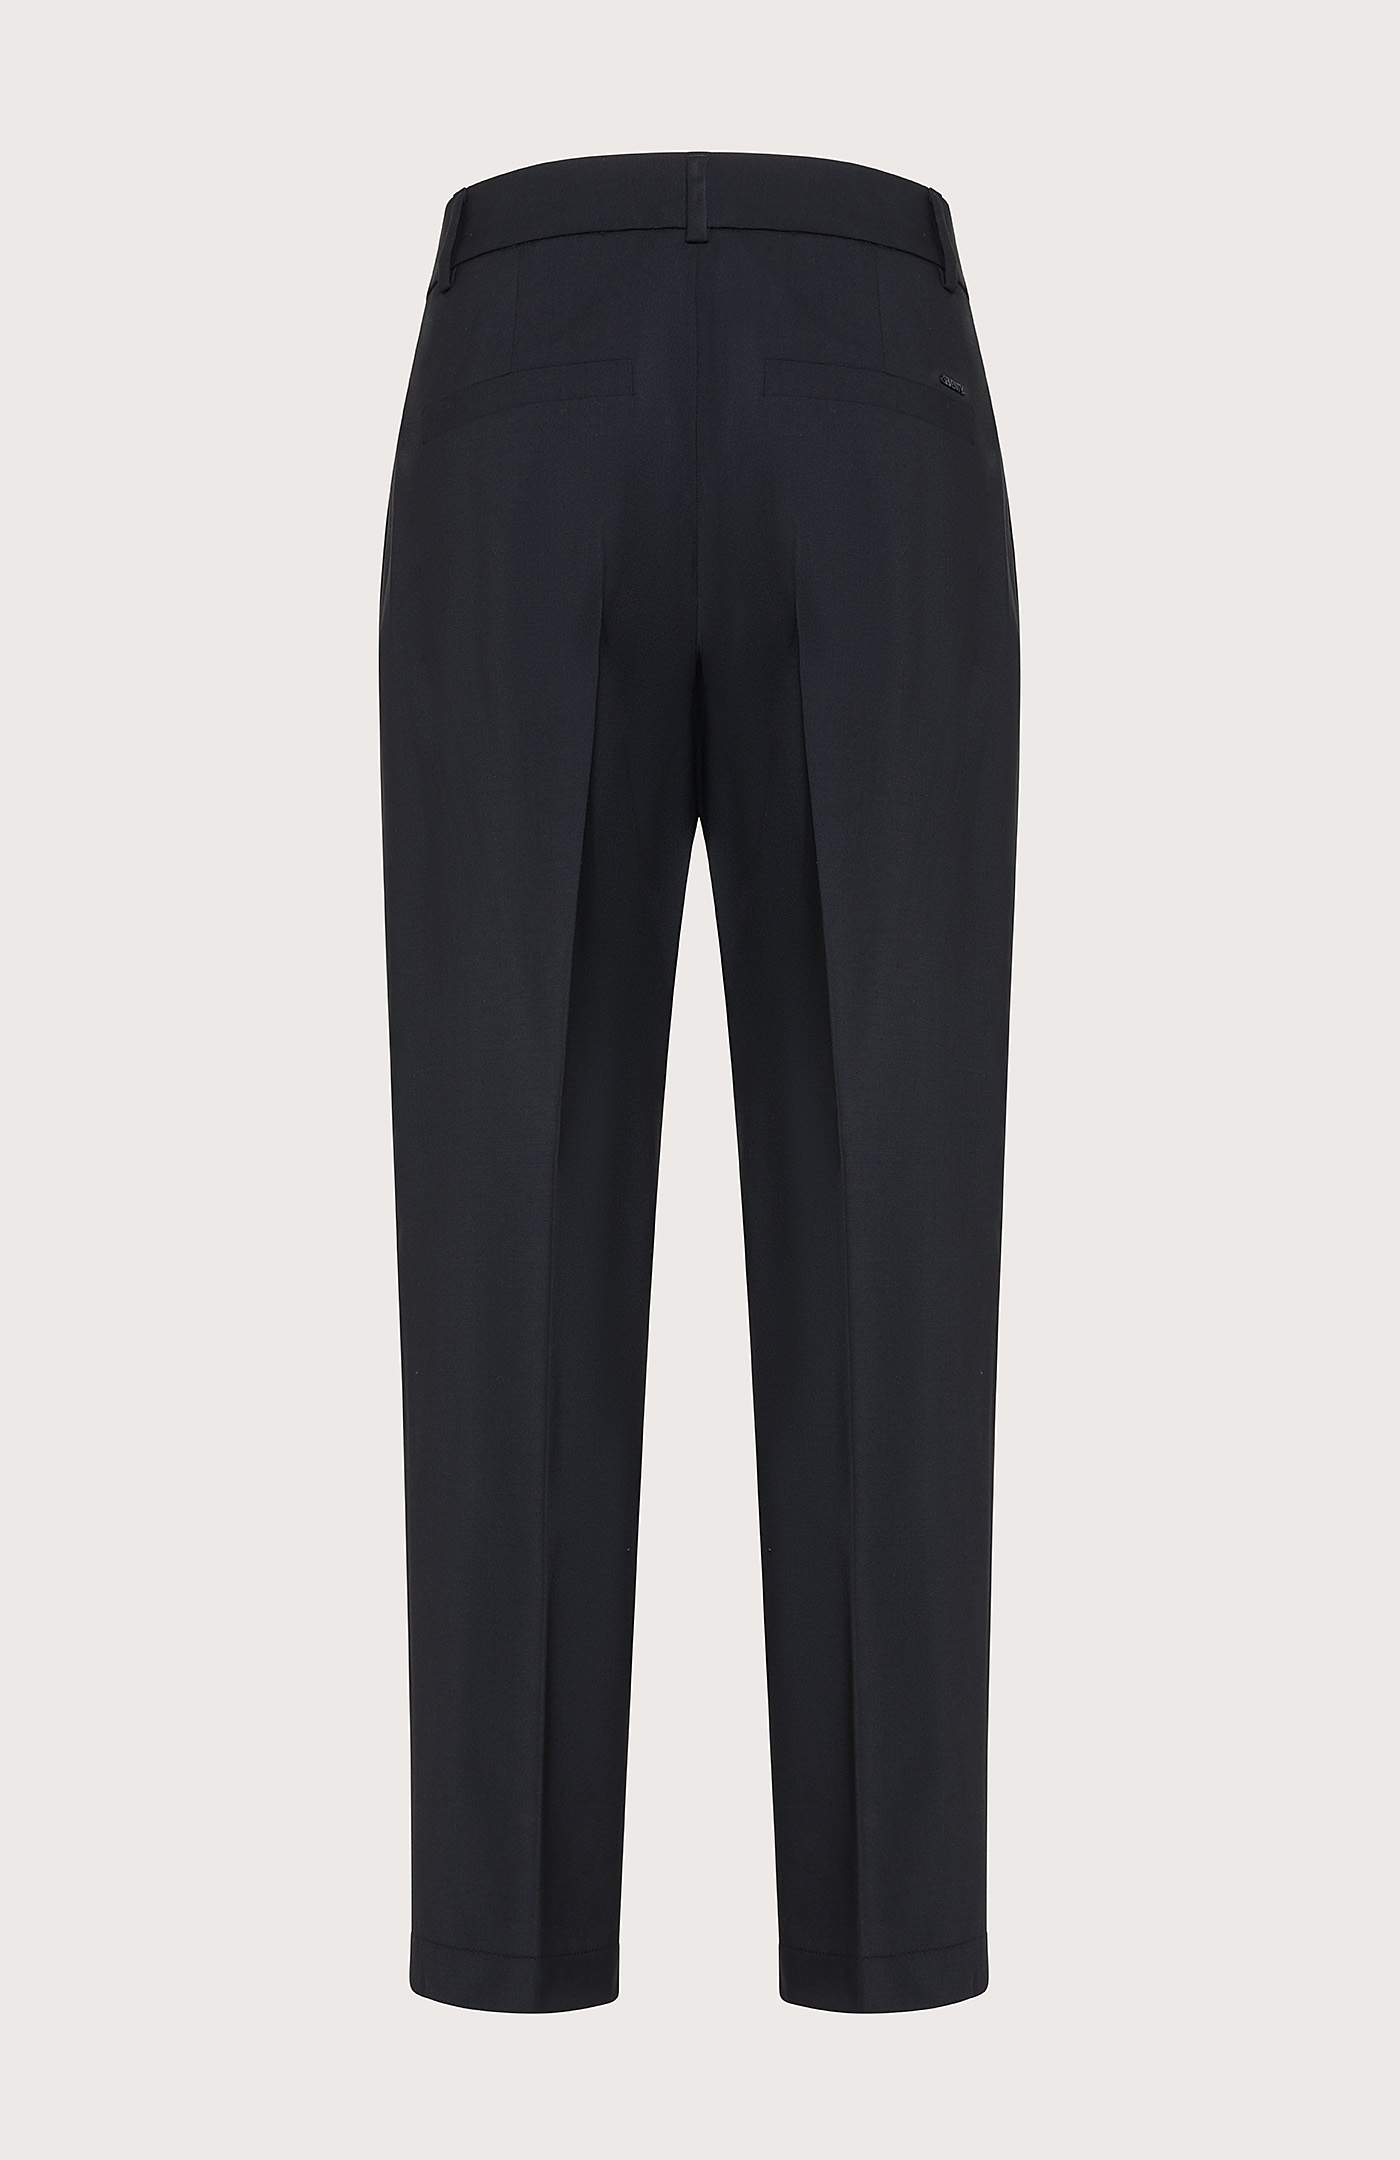 Harry Brown tweed wool mix carrot fit trousers | ASOS